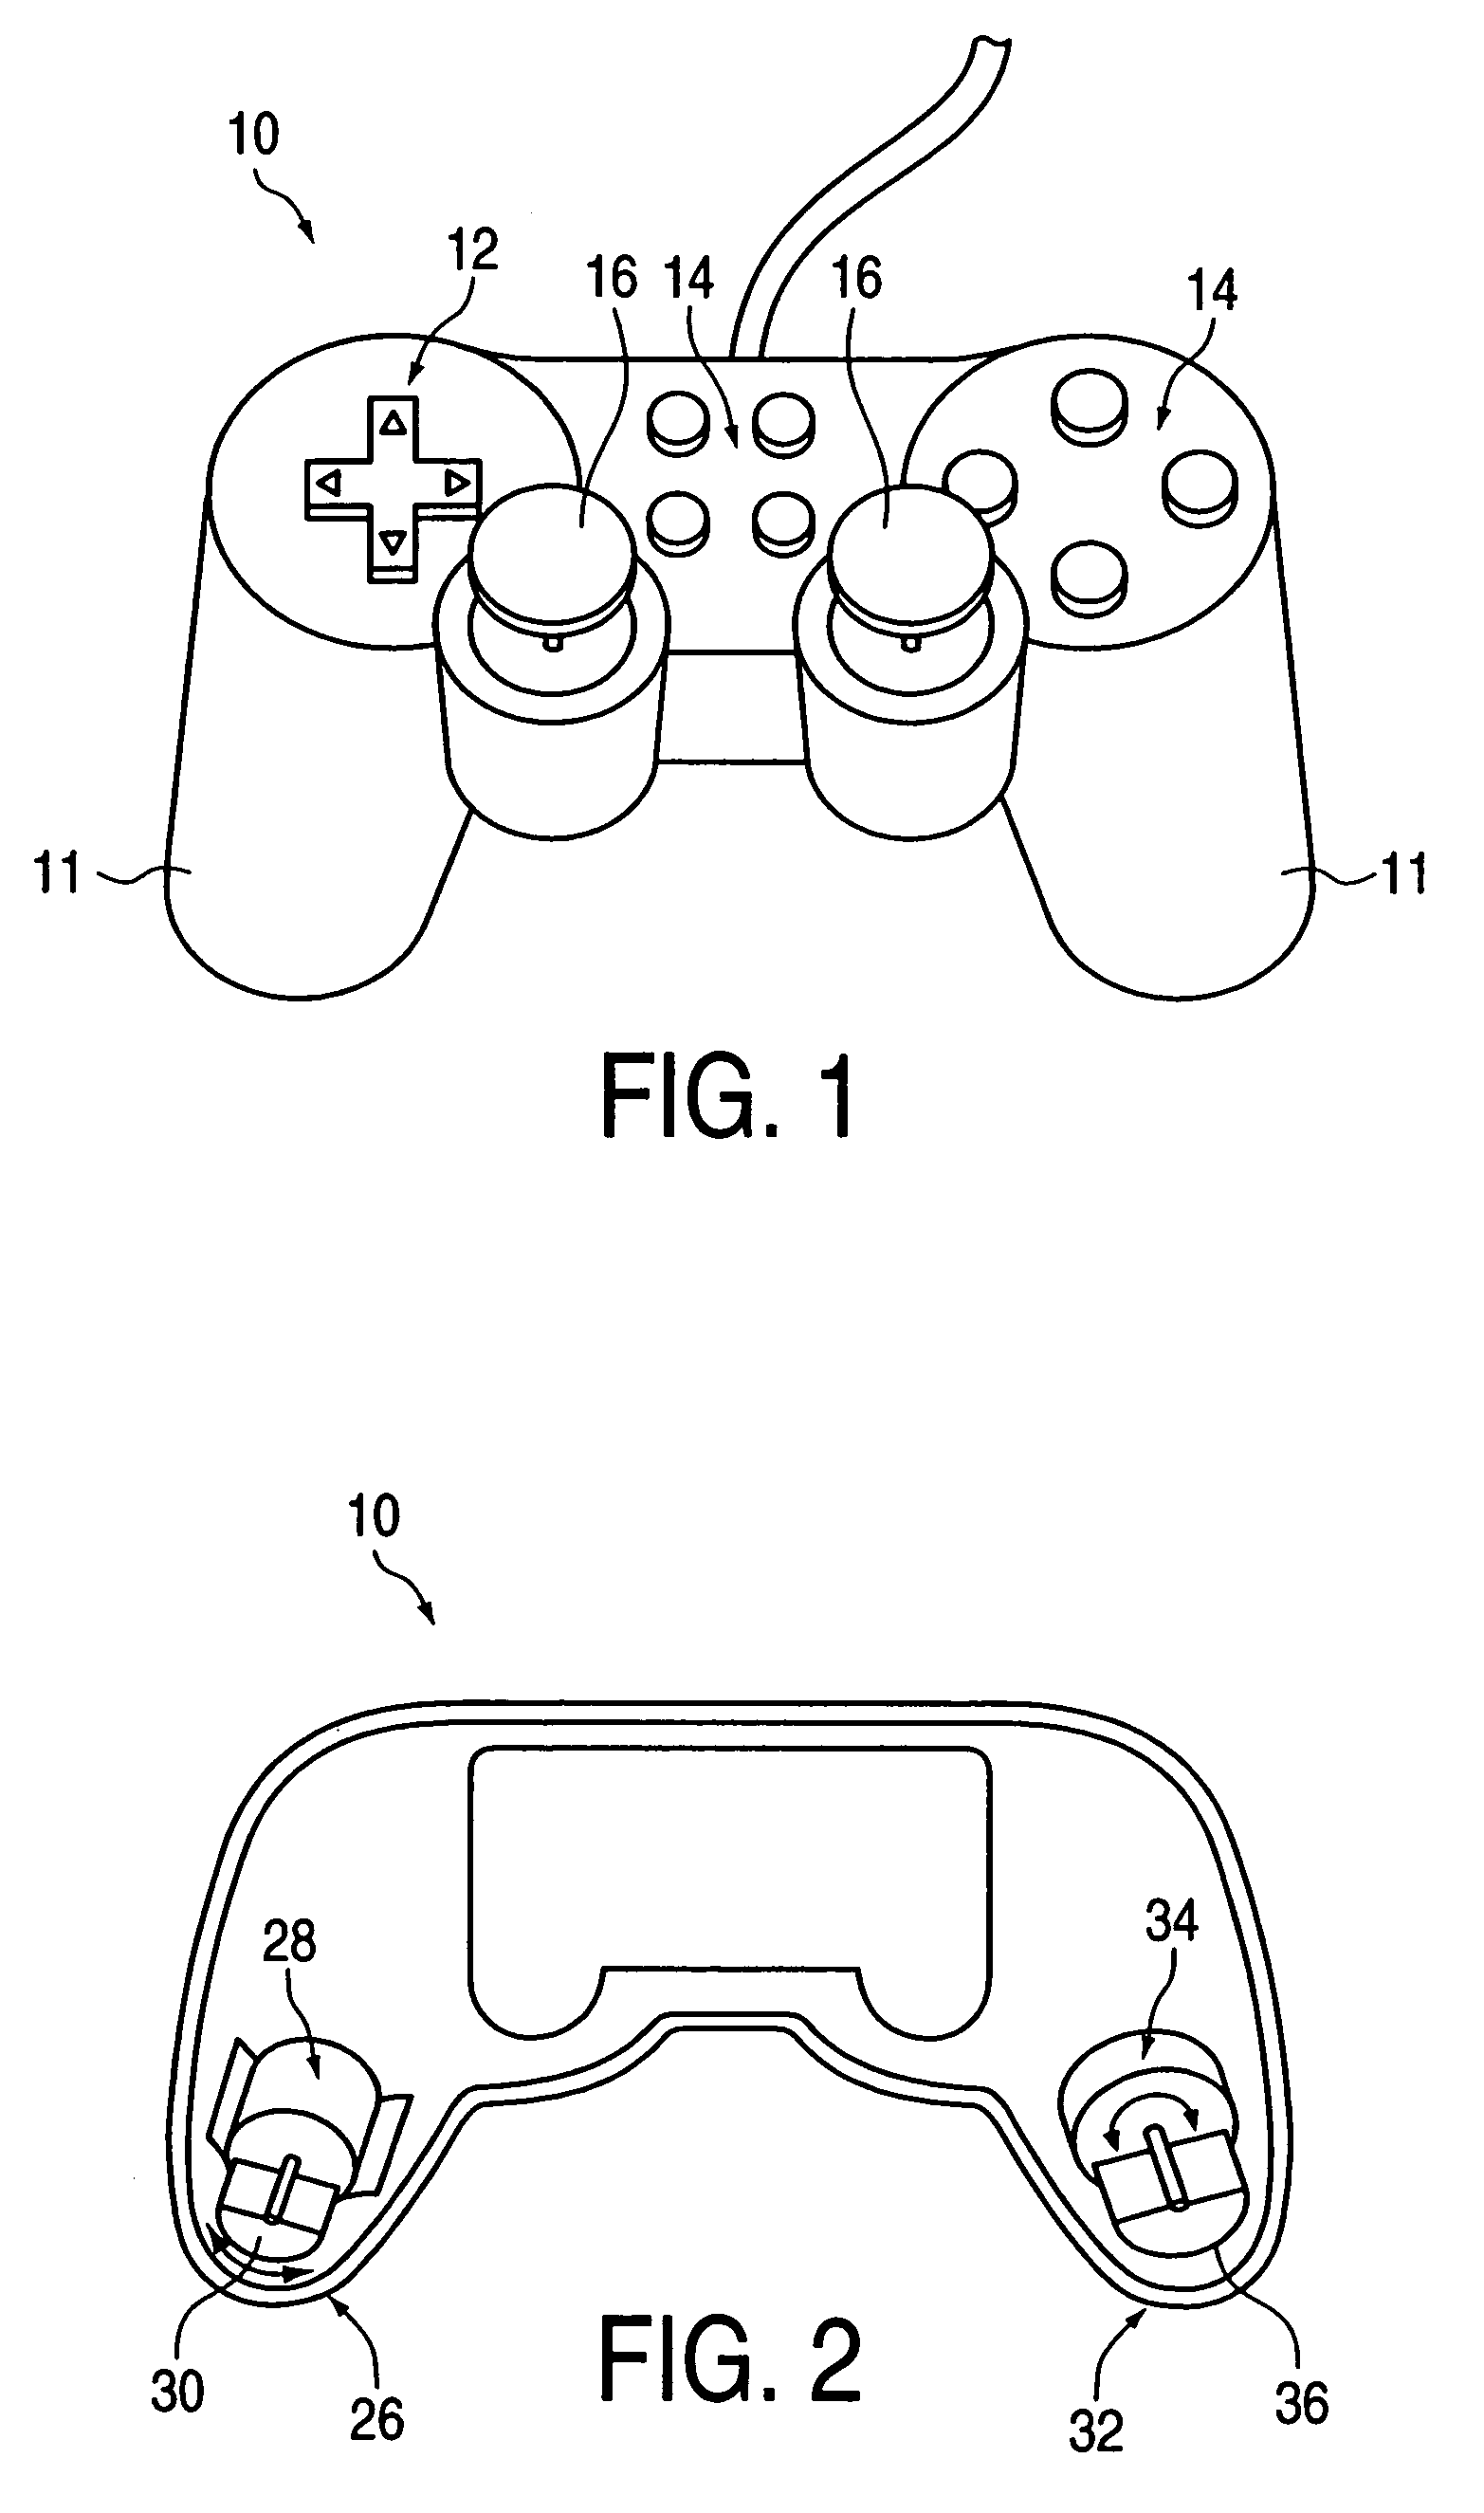 Increasing force transmissibility for tactile feedback interface devices